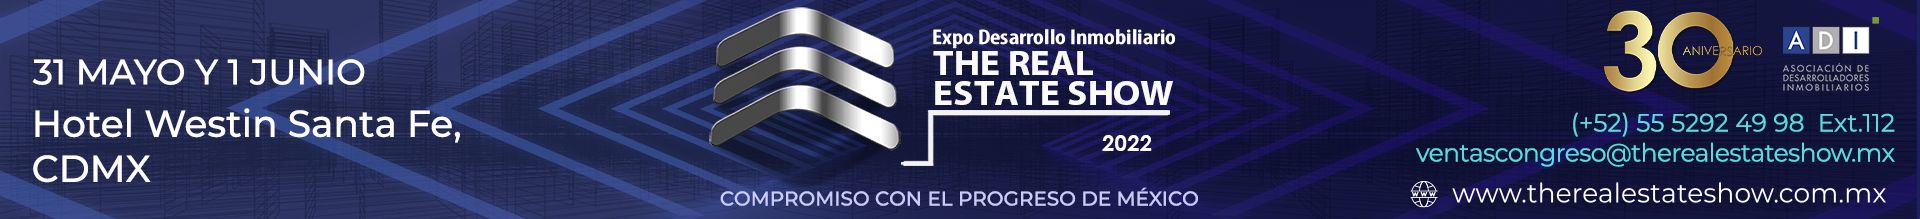 The Real Estate Show 2022